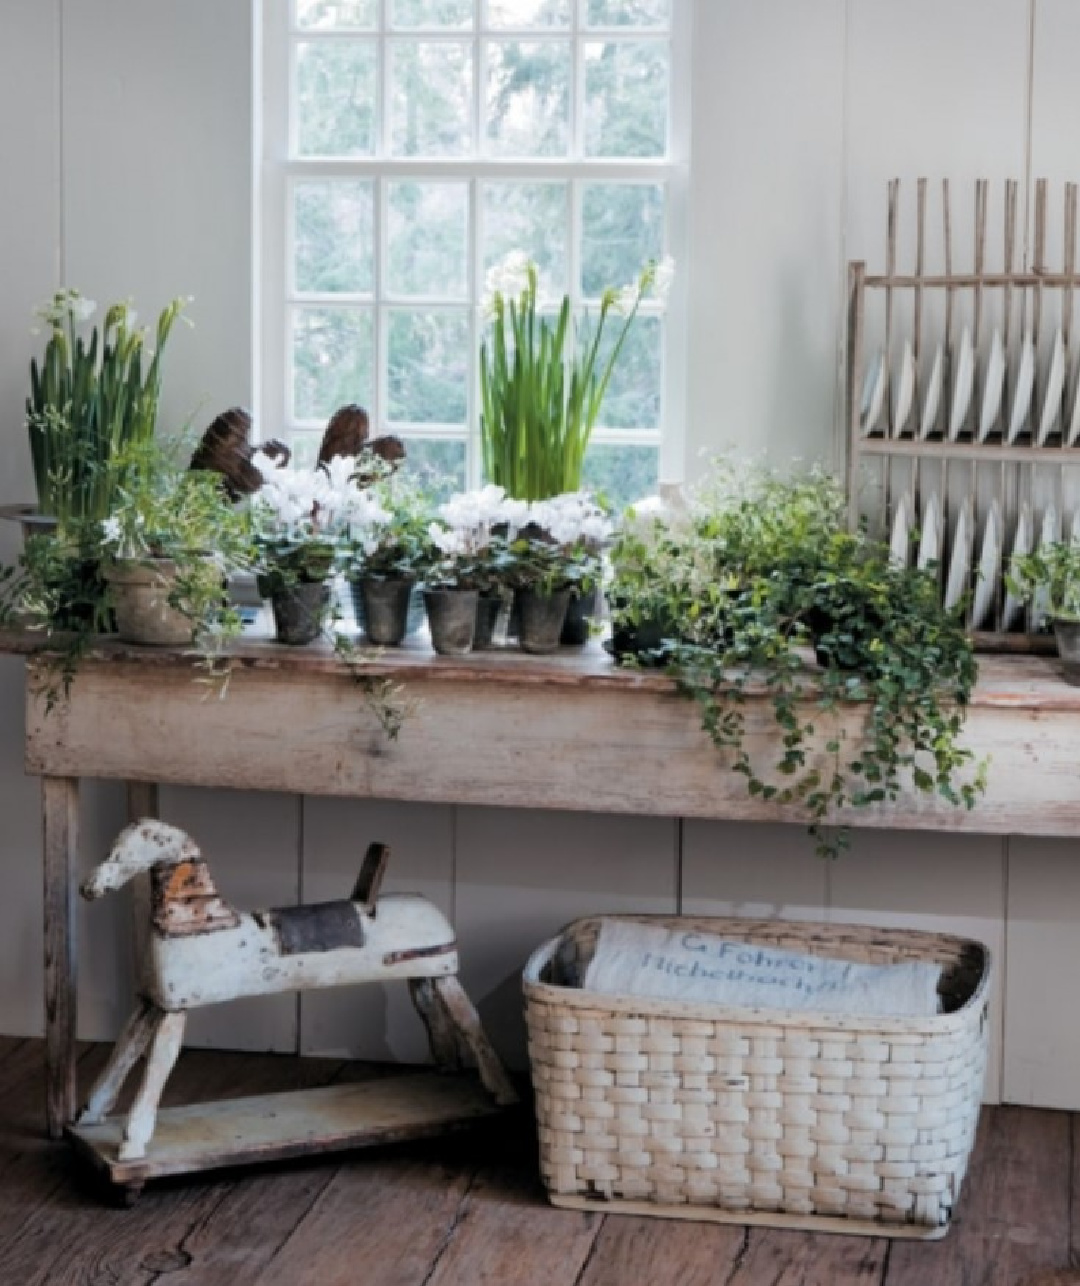 Nancy Fishelson's beautiful renovated New England farmhouse filled with liberal doses of white, simplicity, and antiques.